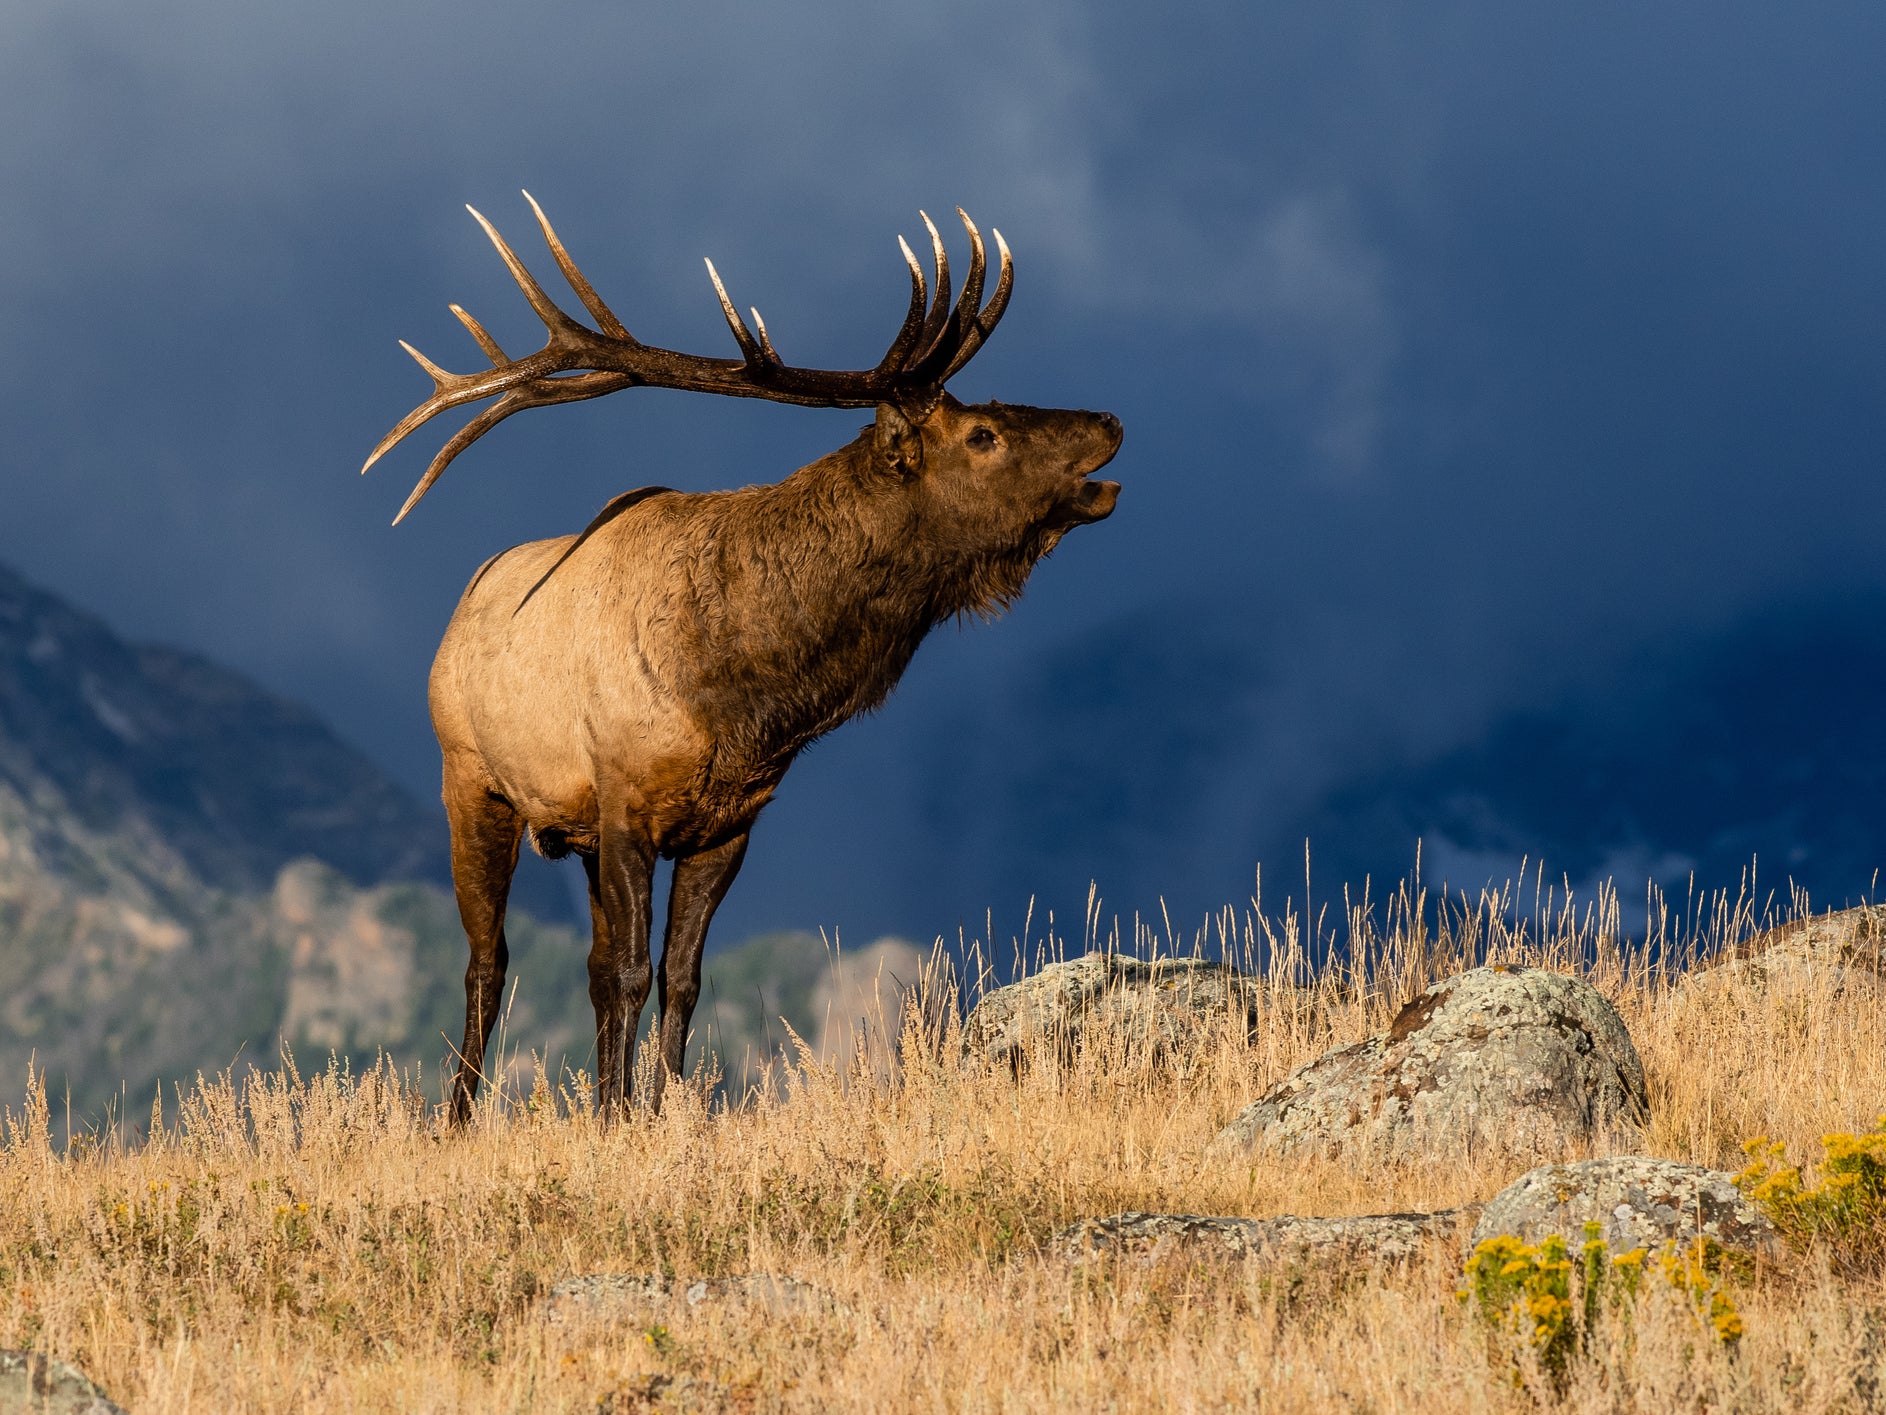 Elk may become aggressive if they are penned in and at mating time, experts say